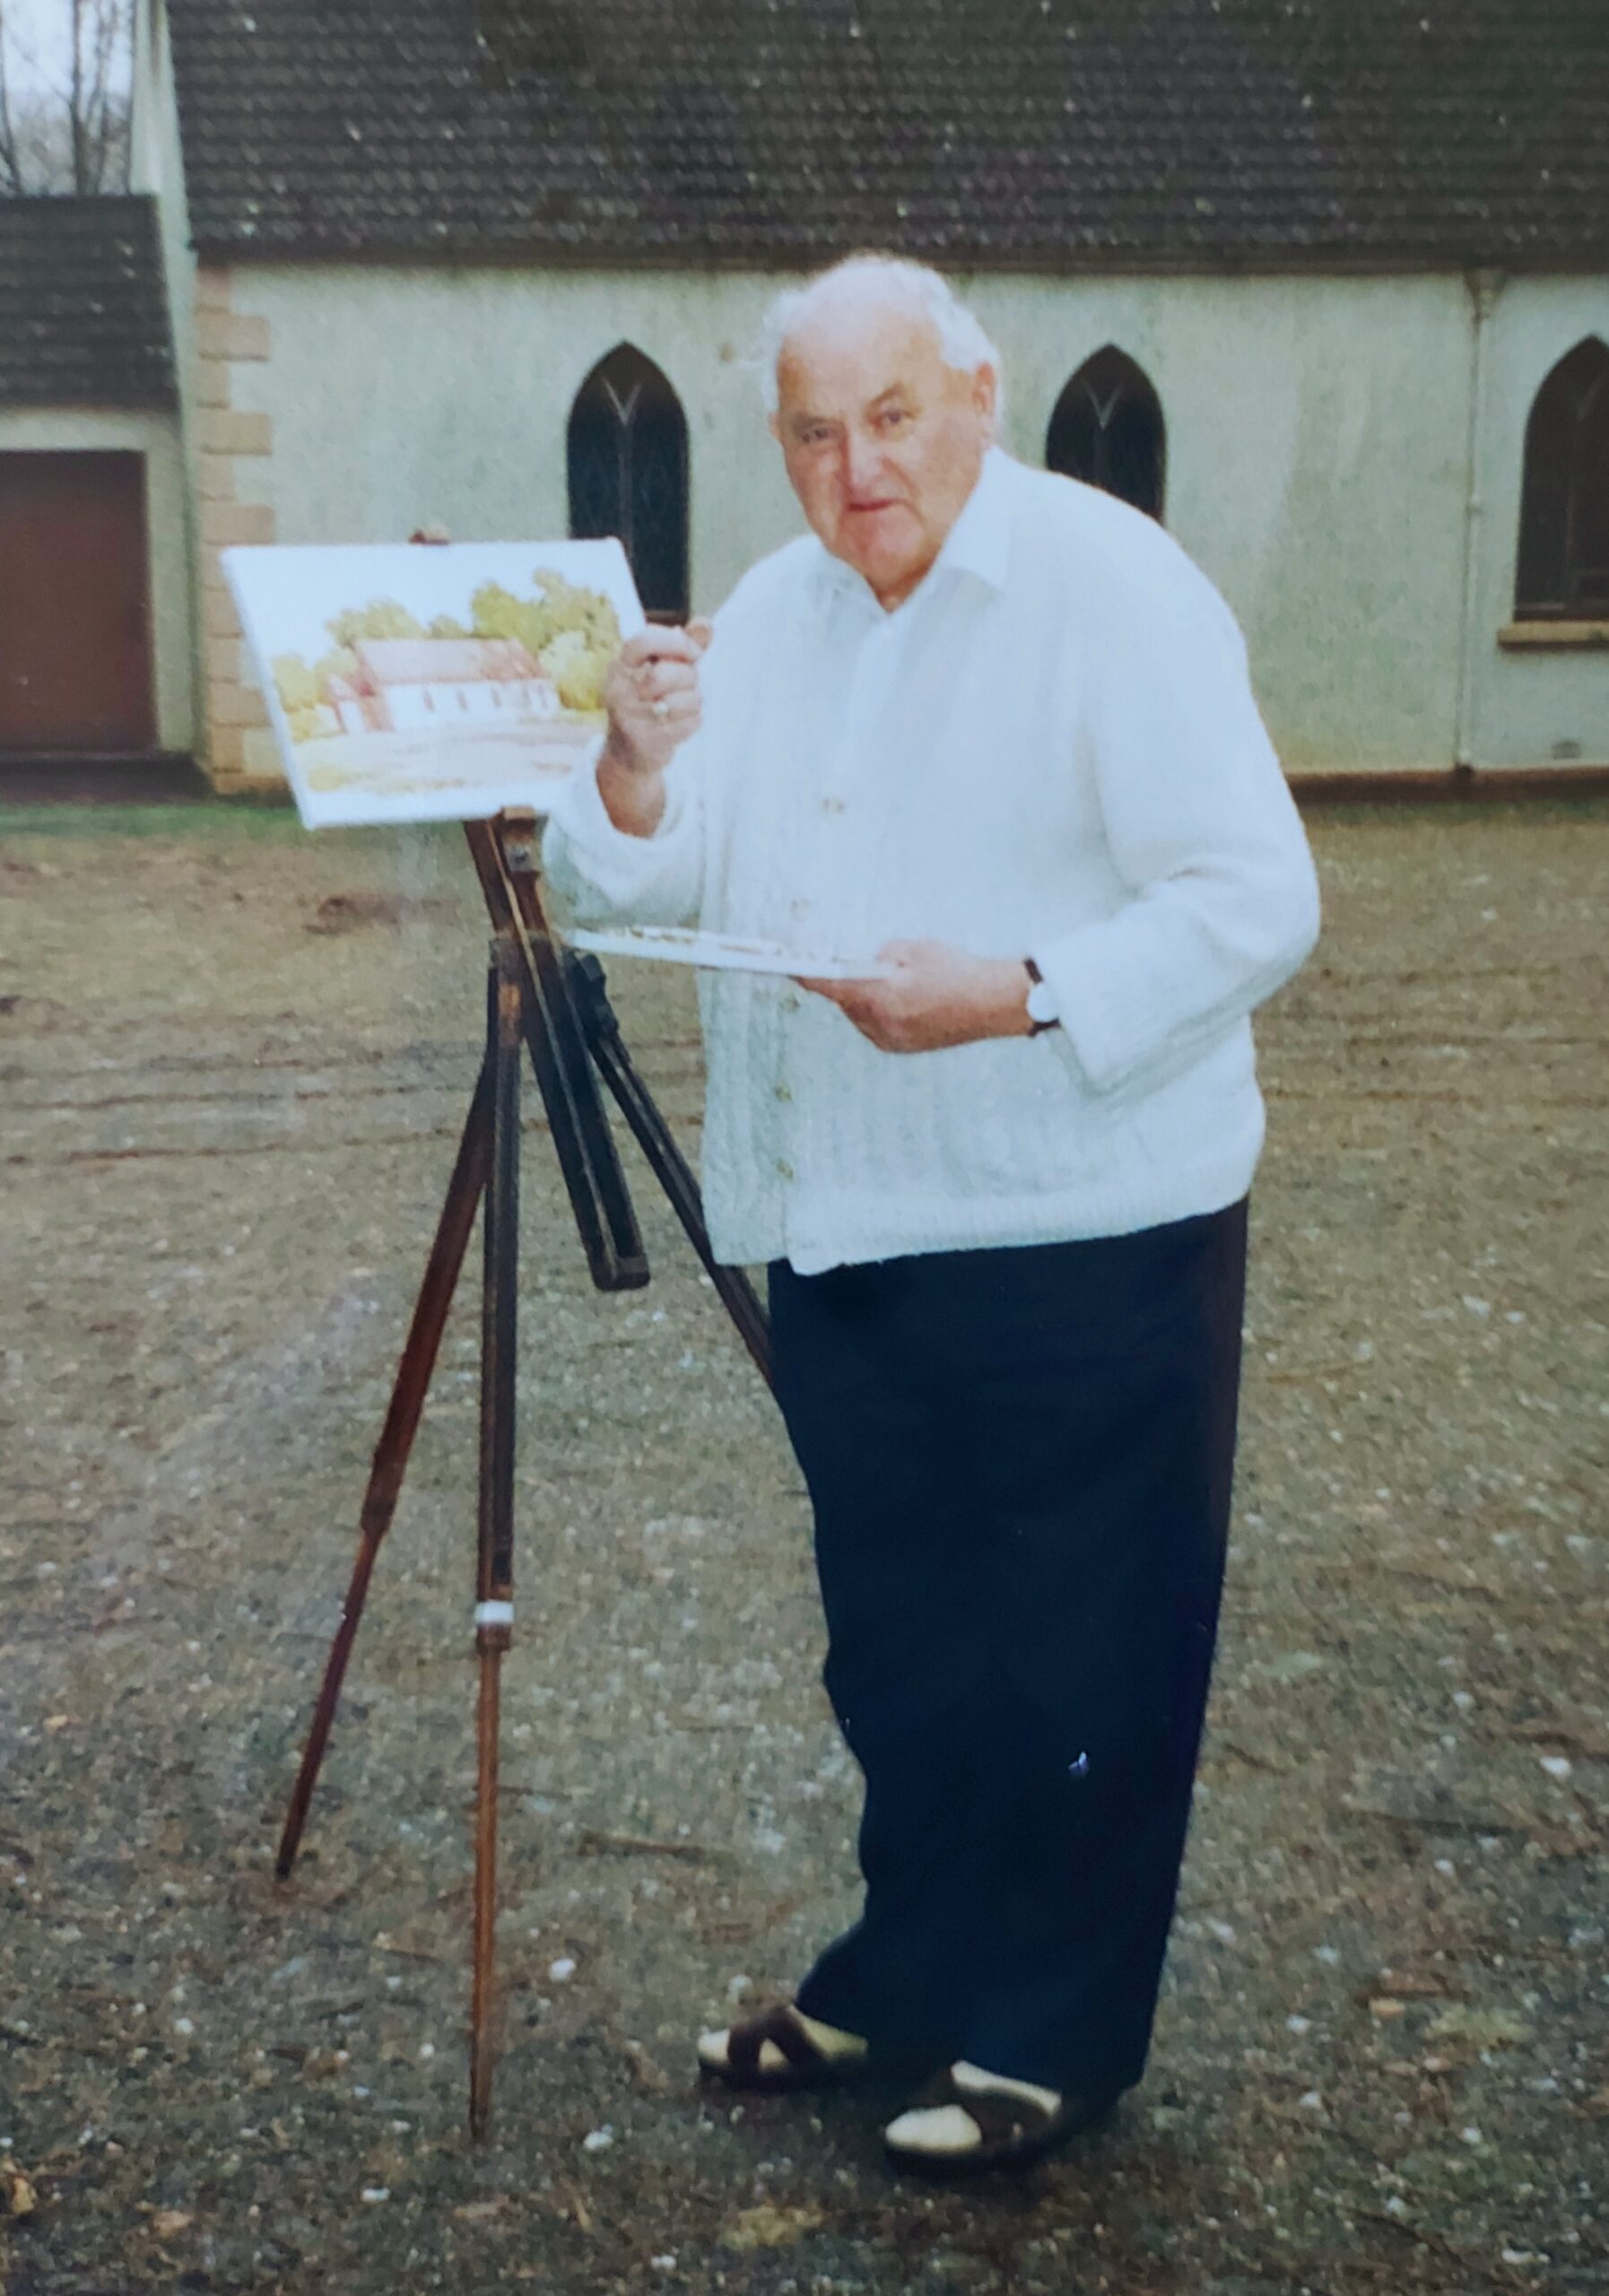 Sam McLarnon painting a picture of the Glenshesk Chapel, 1980's